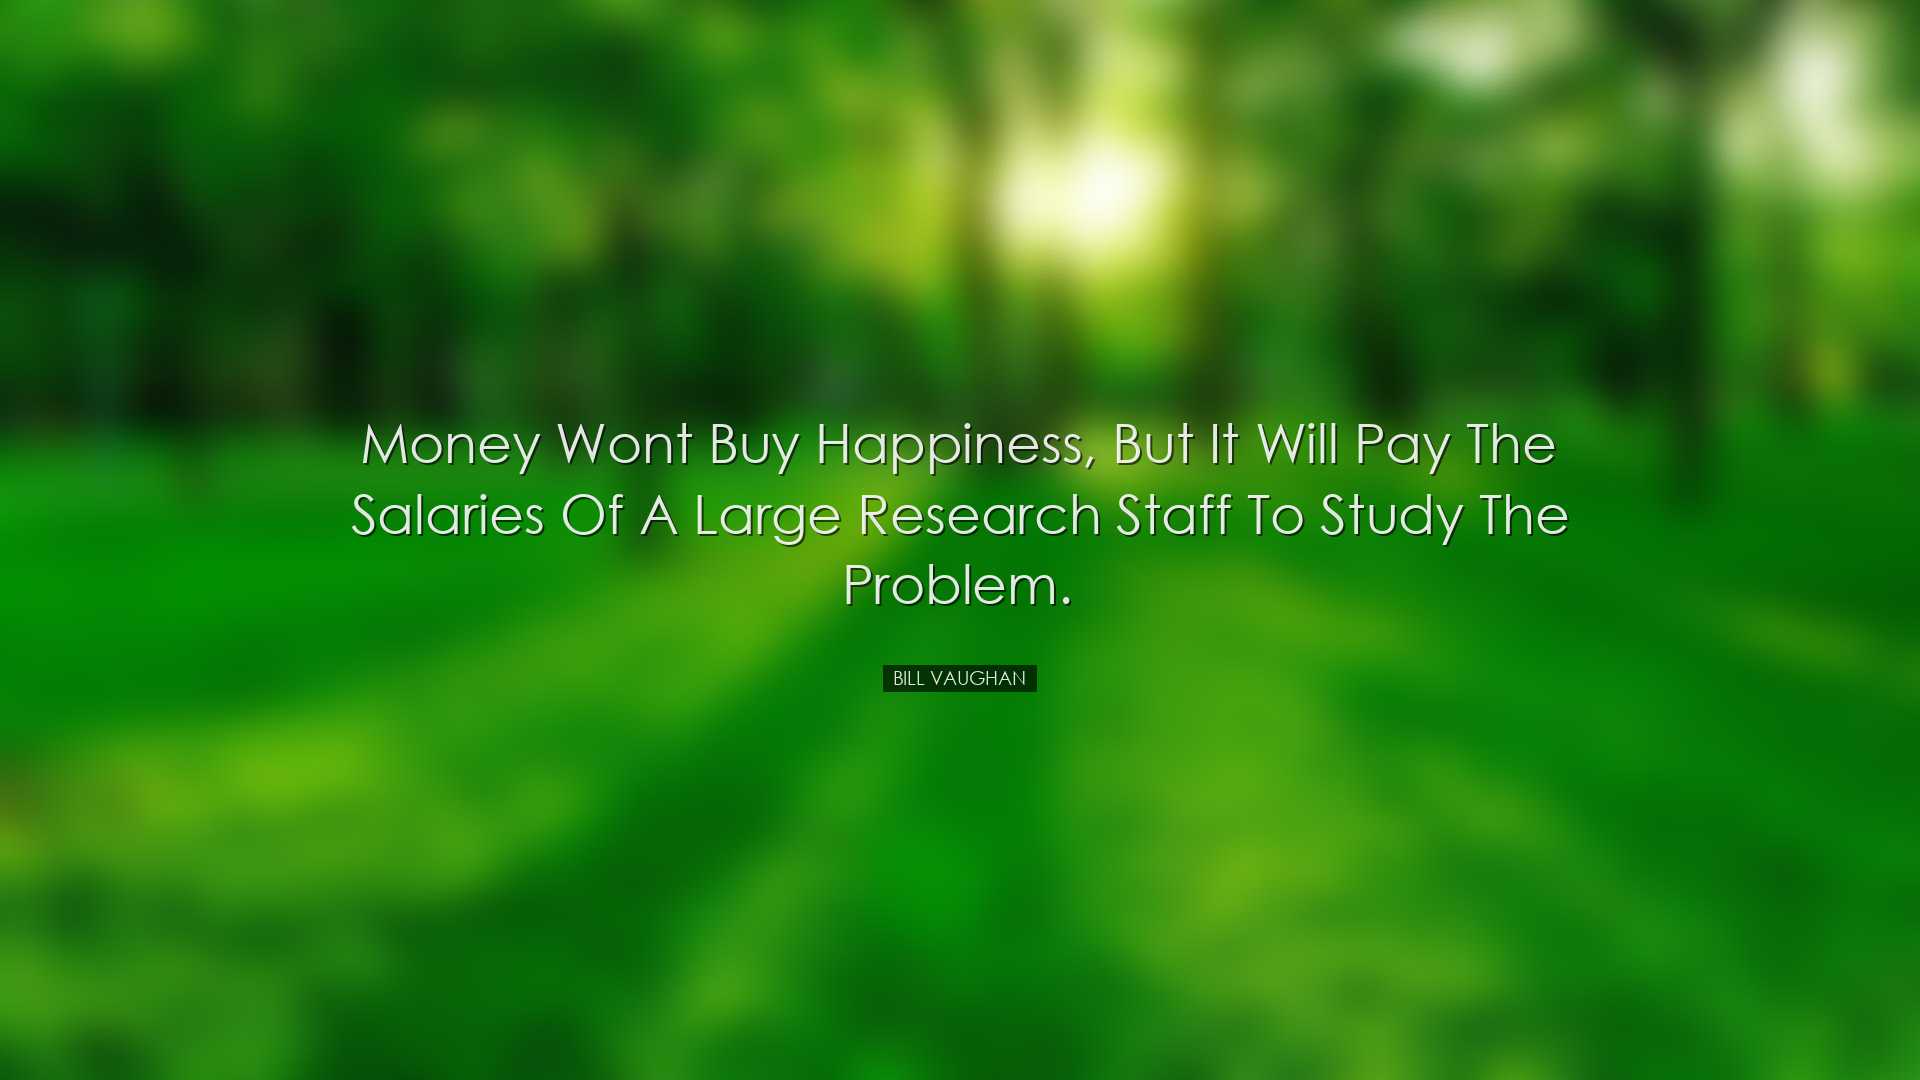 Money wont buy happiness, but it will pay the salaries of a large